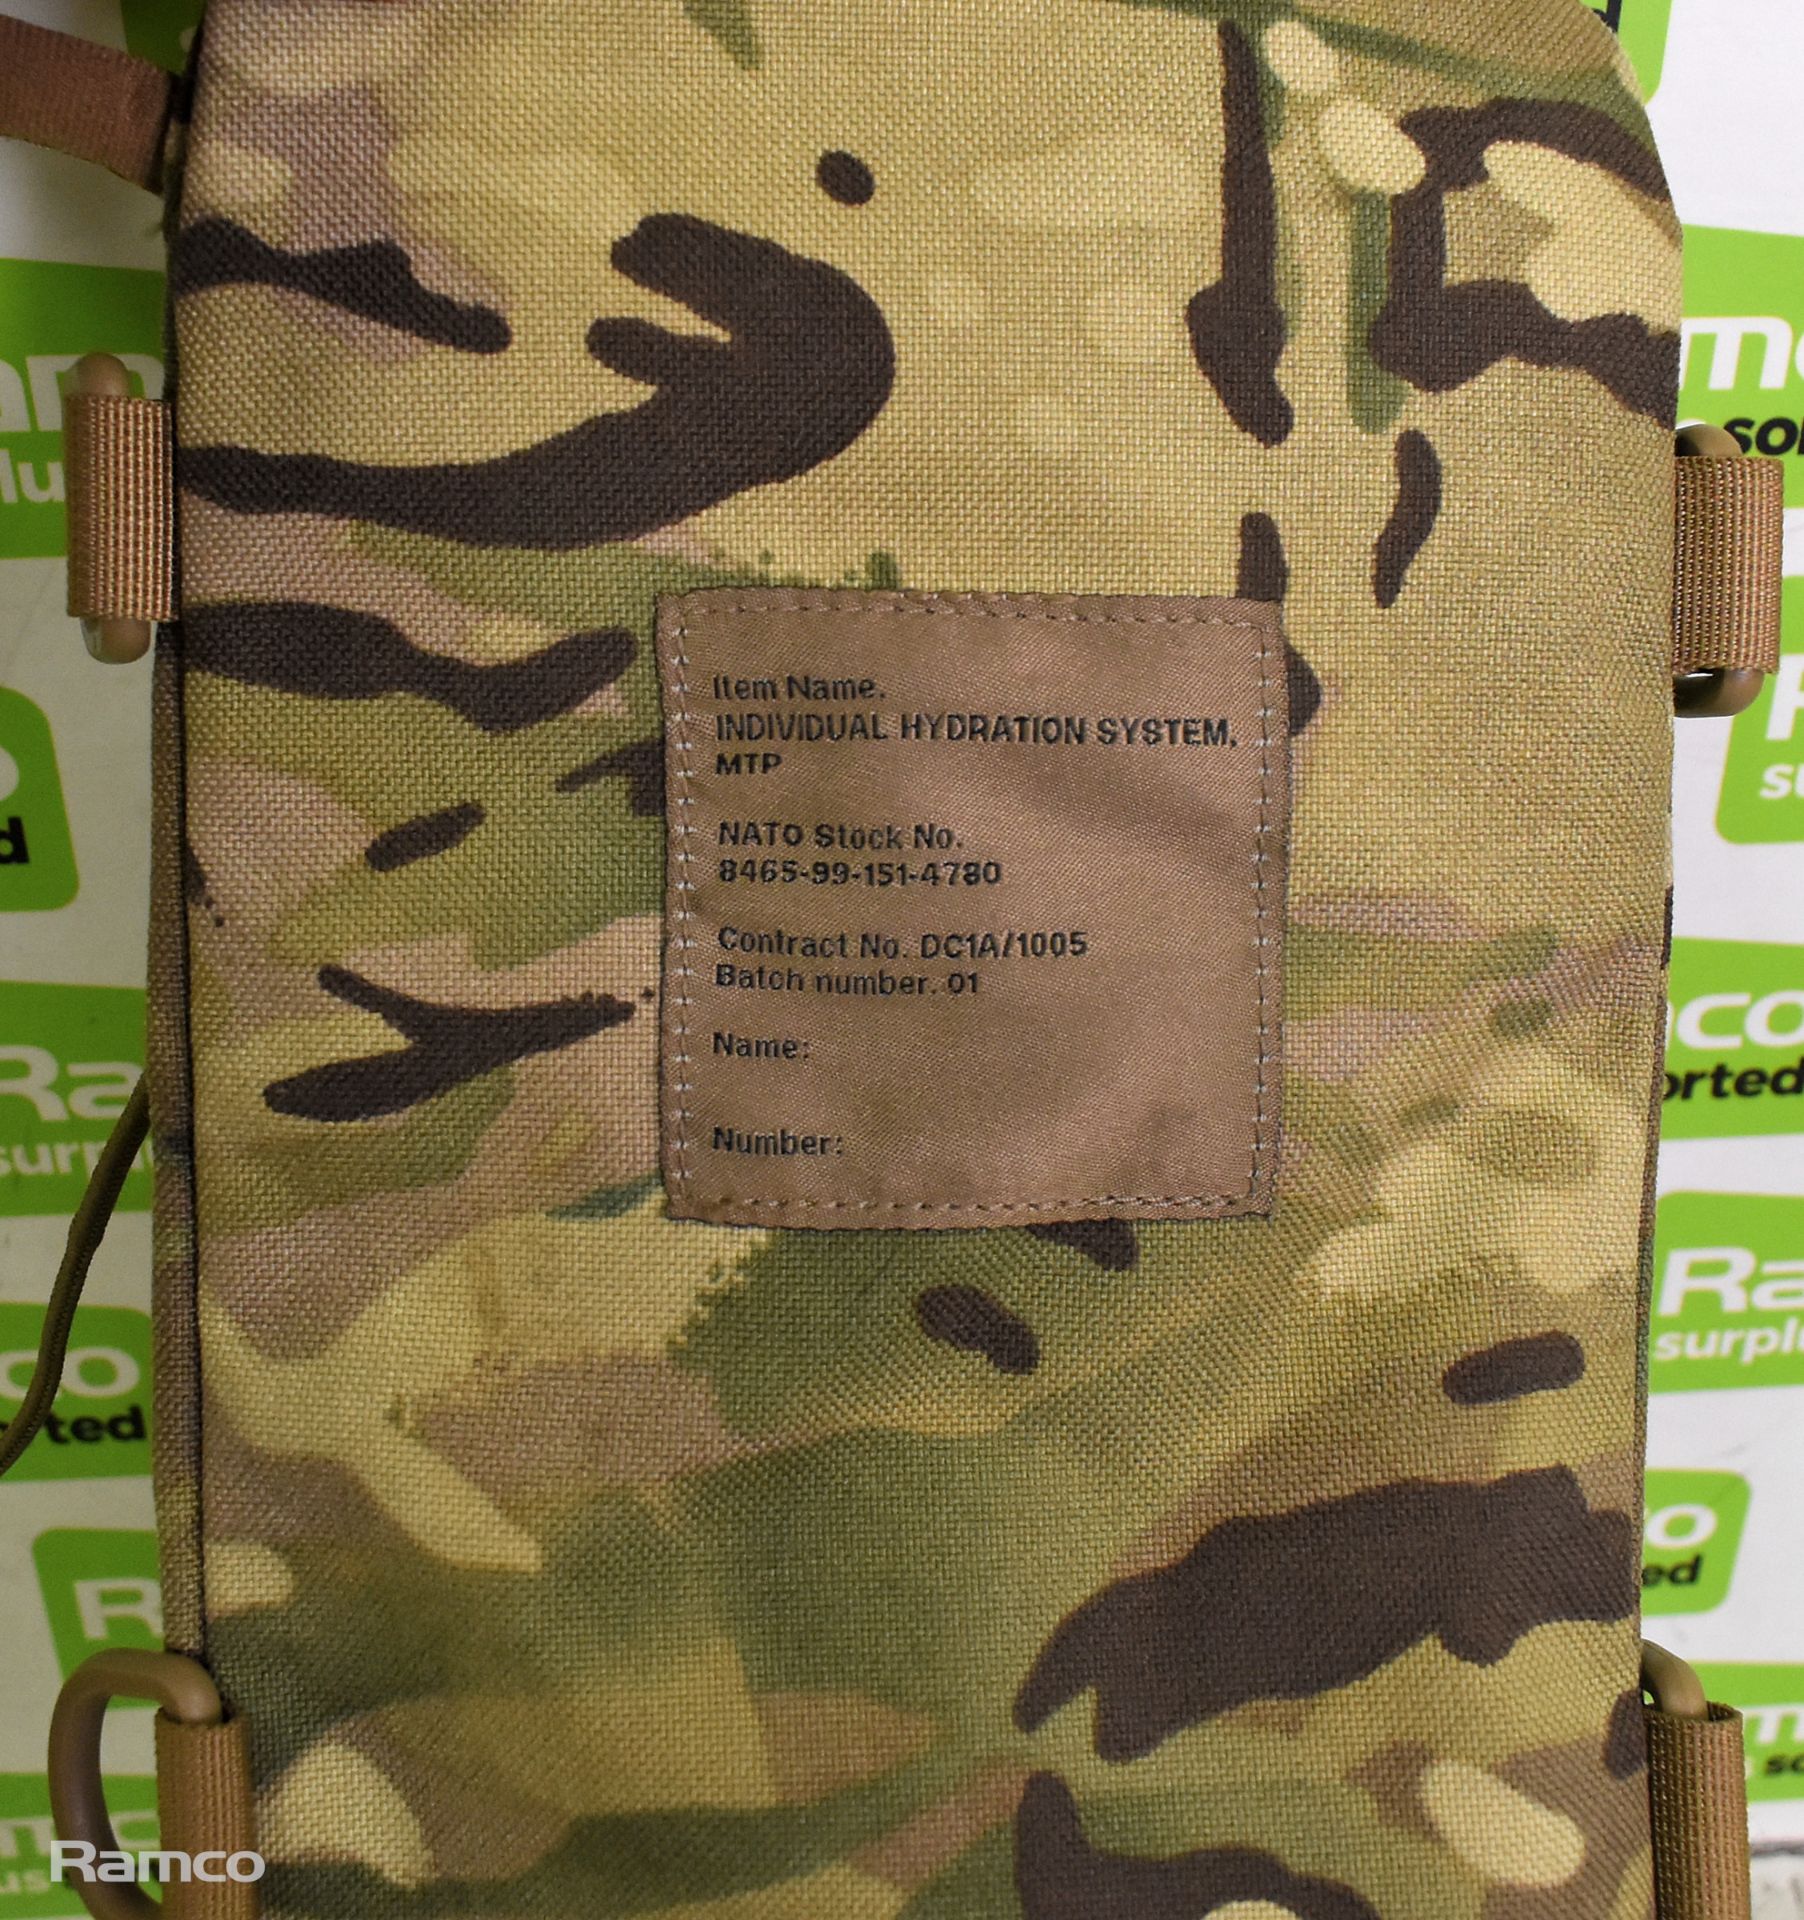 British Army body covers & ammunition pouches - see description for details - Image 5 of 16